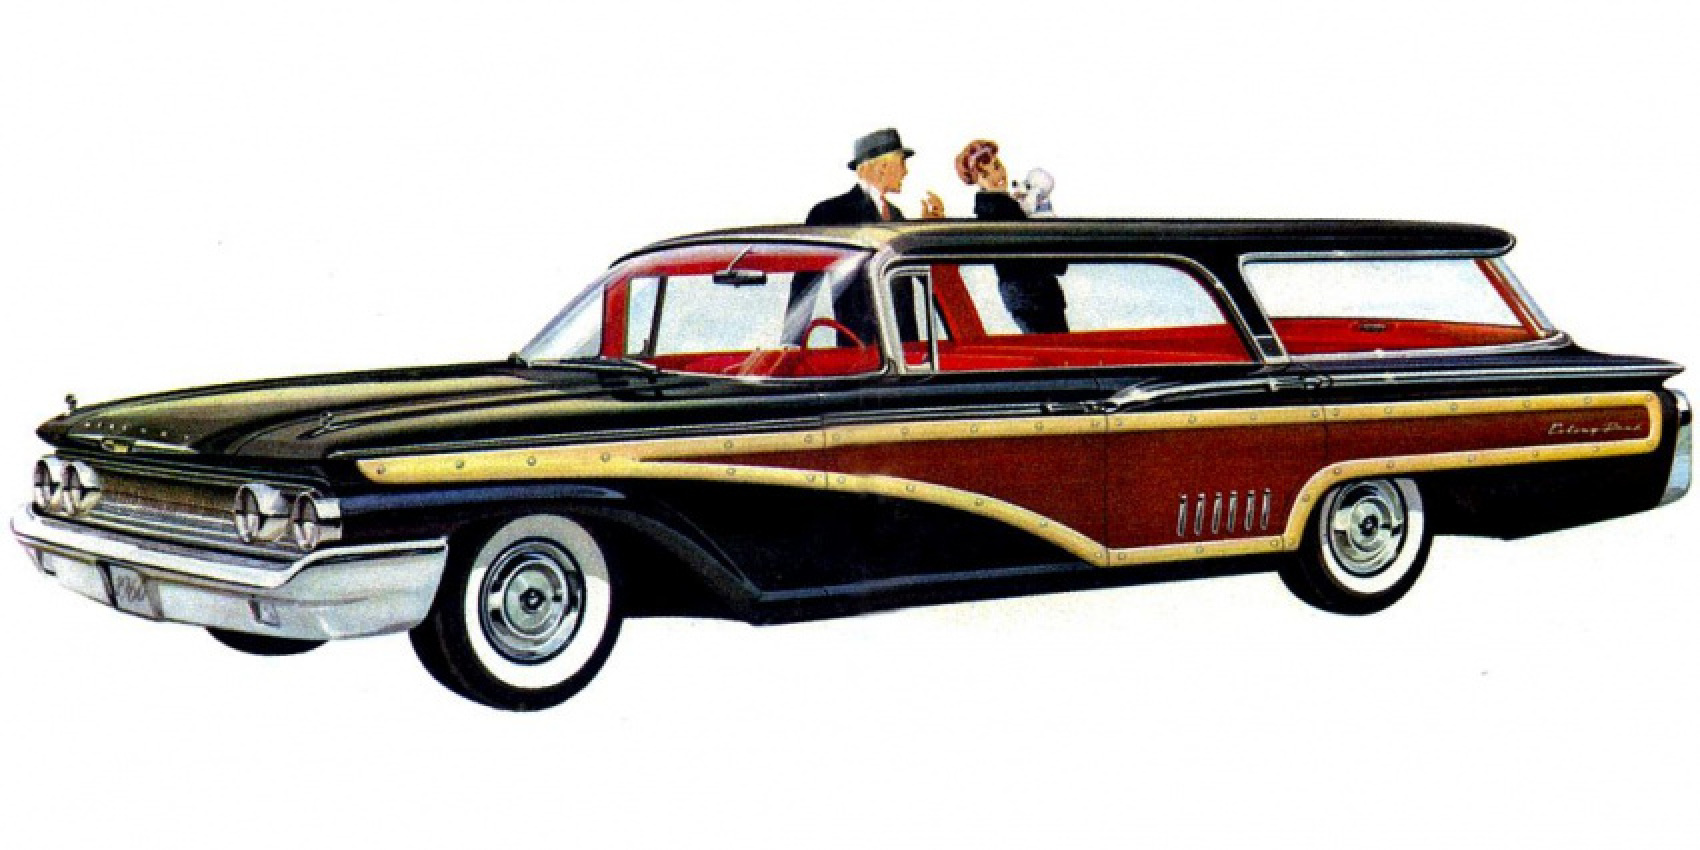 autos, cars, classic cars, amazon, amazon, what year was peak wagon in america?